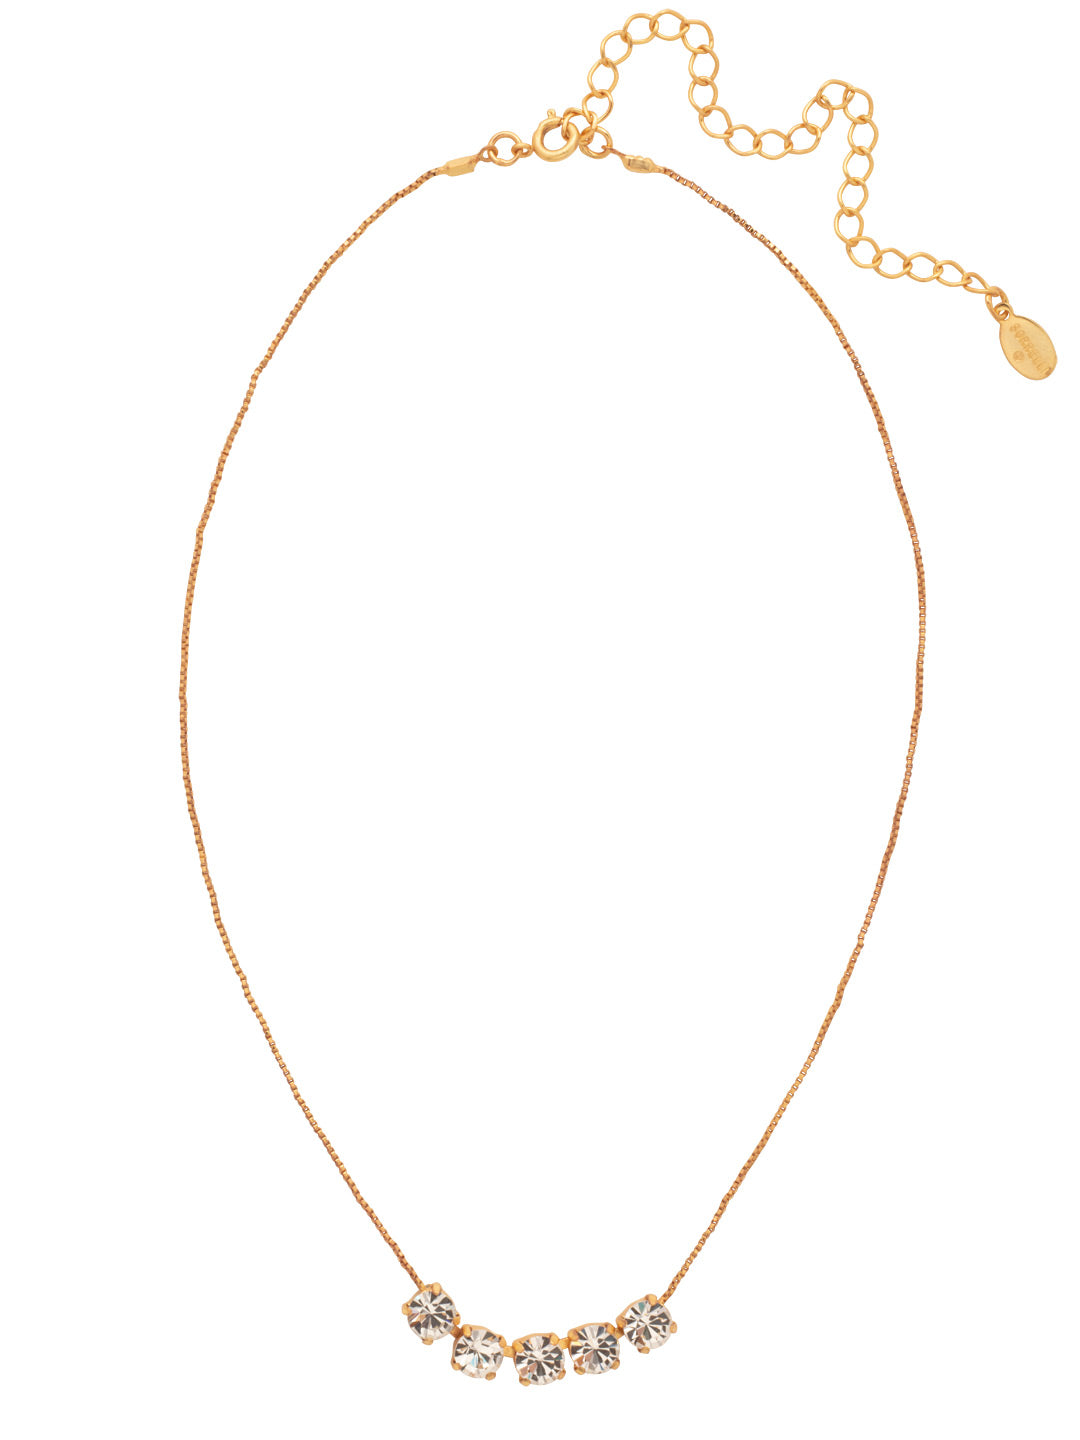 Shaughna Tennis Necklace - NFC84MGCRY - <p>The Shaughna Tennis Necklace features five crystals on a delicate adjustable chain. From Sorrelli's Crystal collection in our Matte Gold-tone finish.</p>